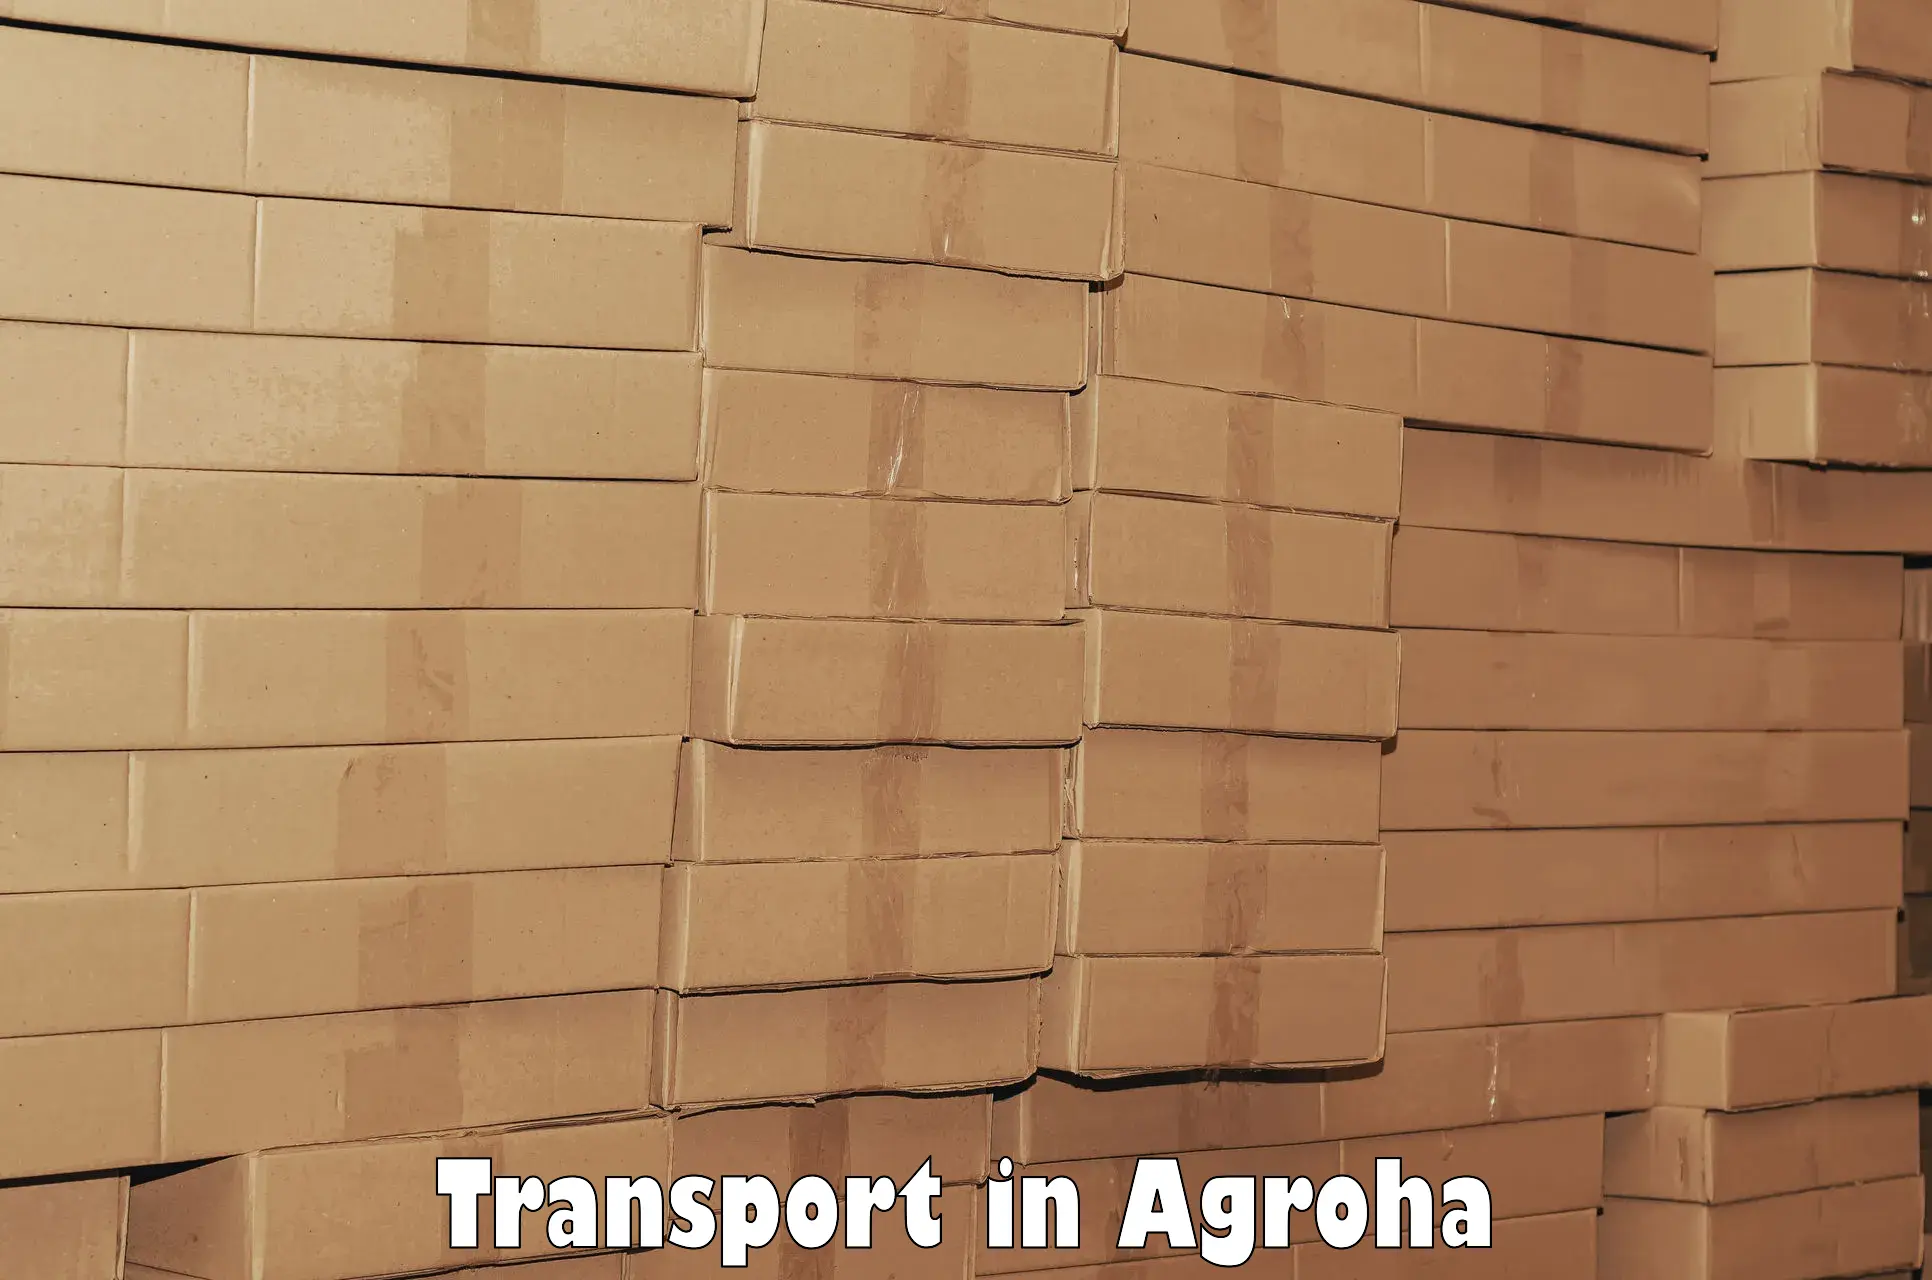 Intercity goods transport in Agroha